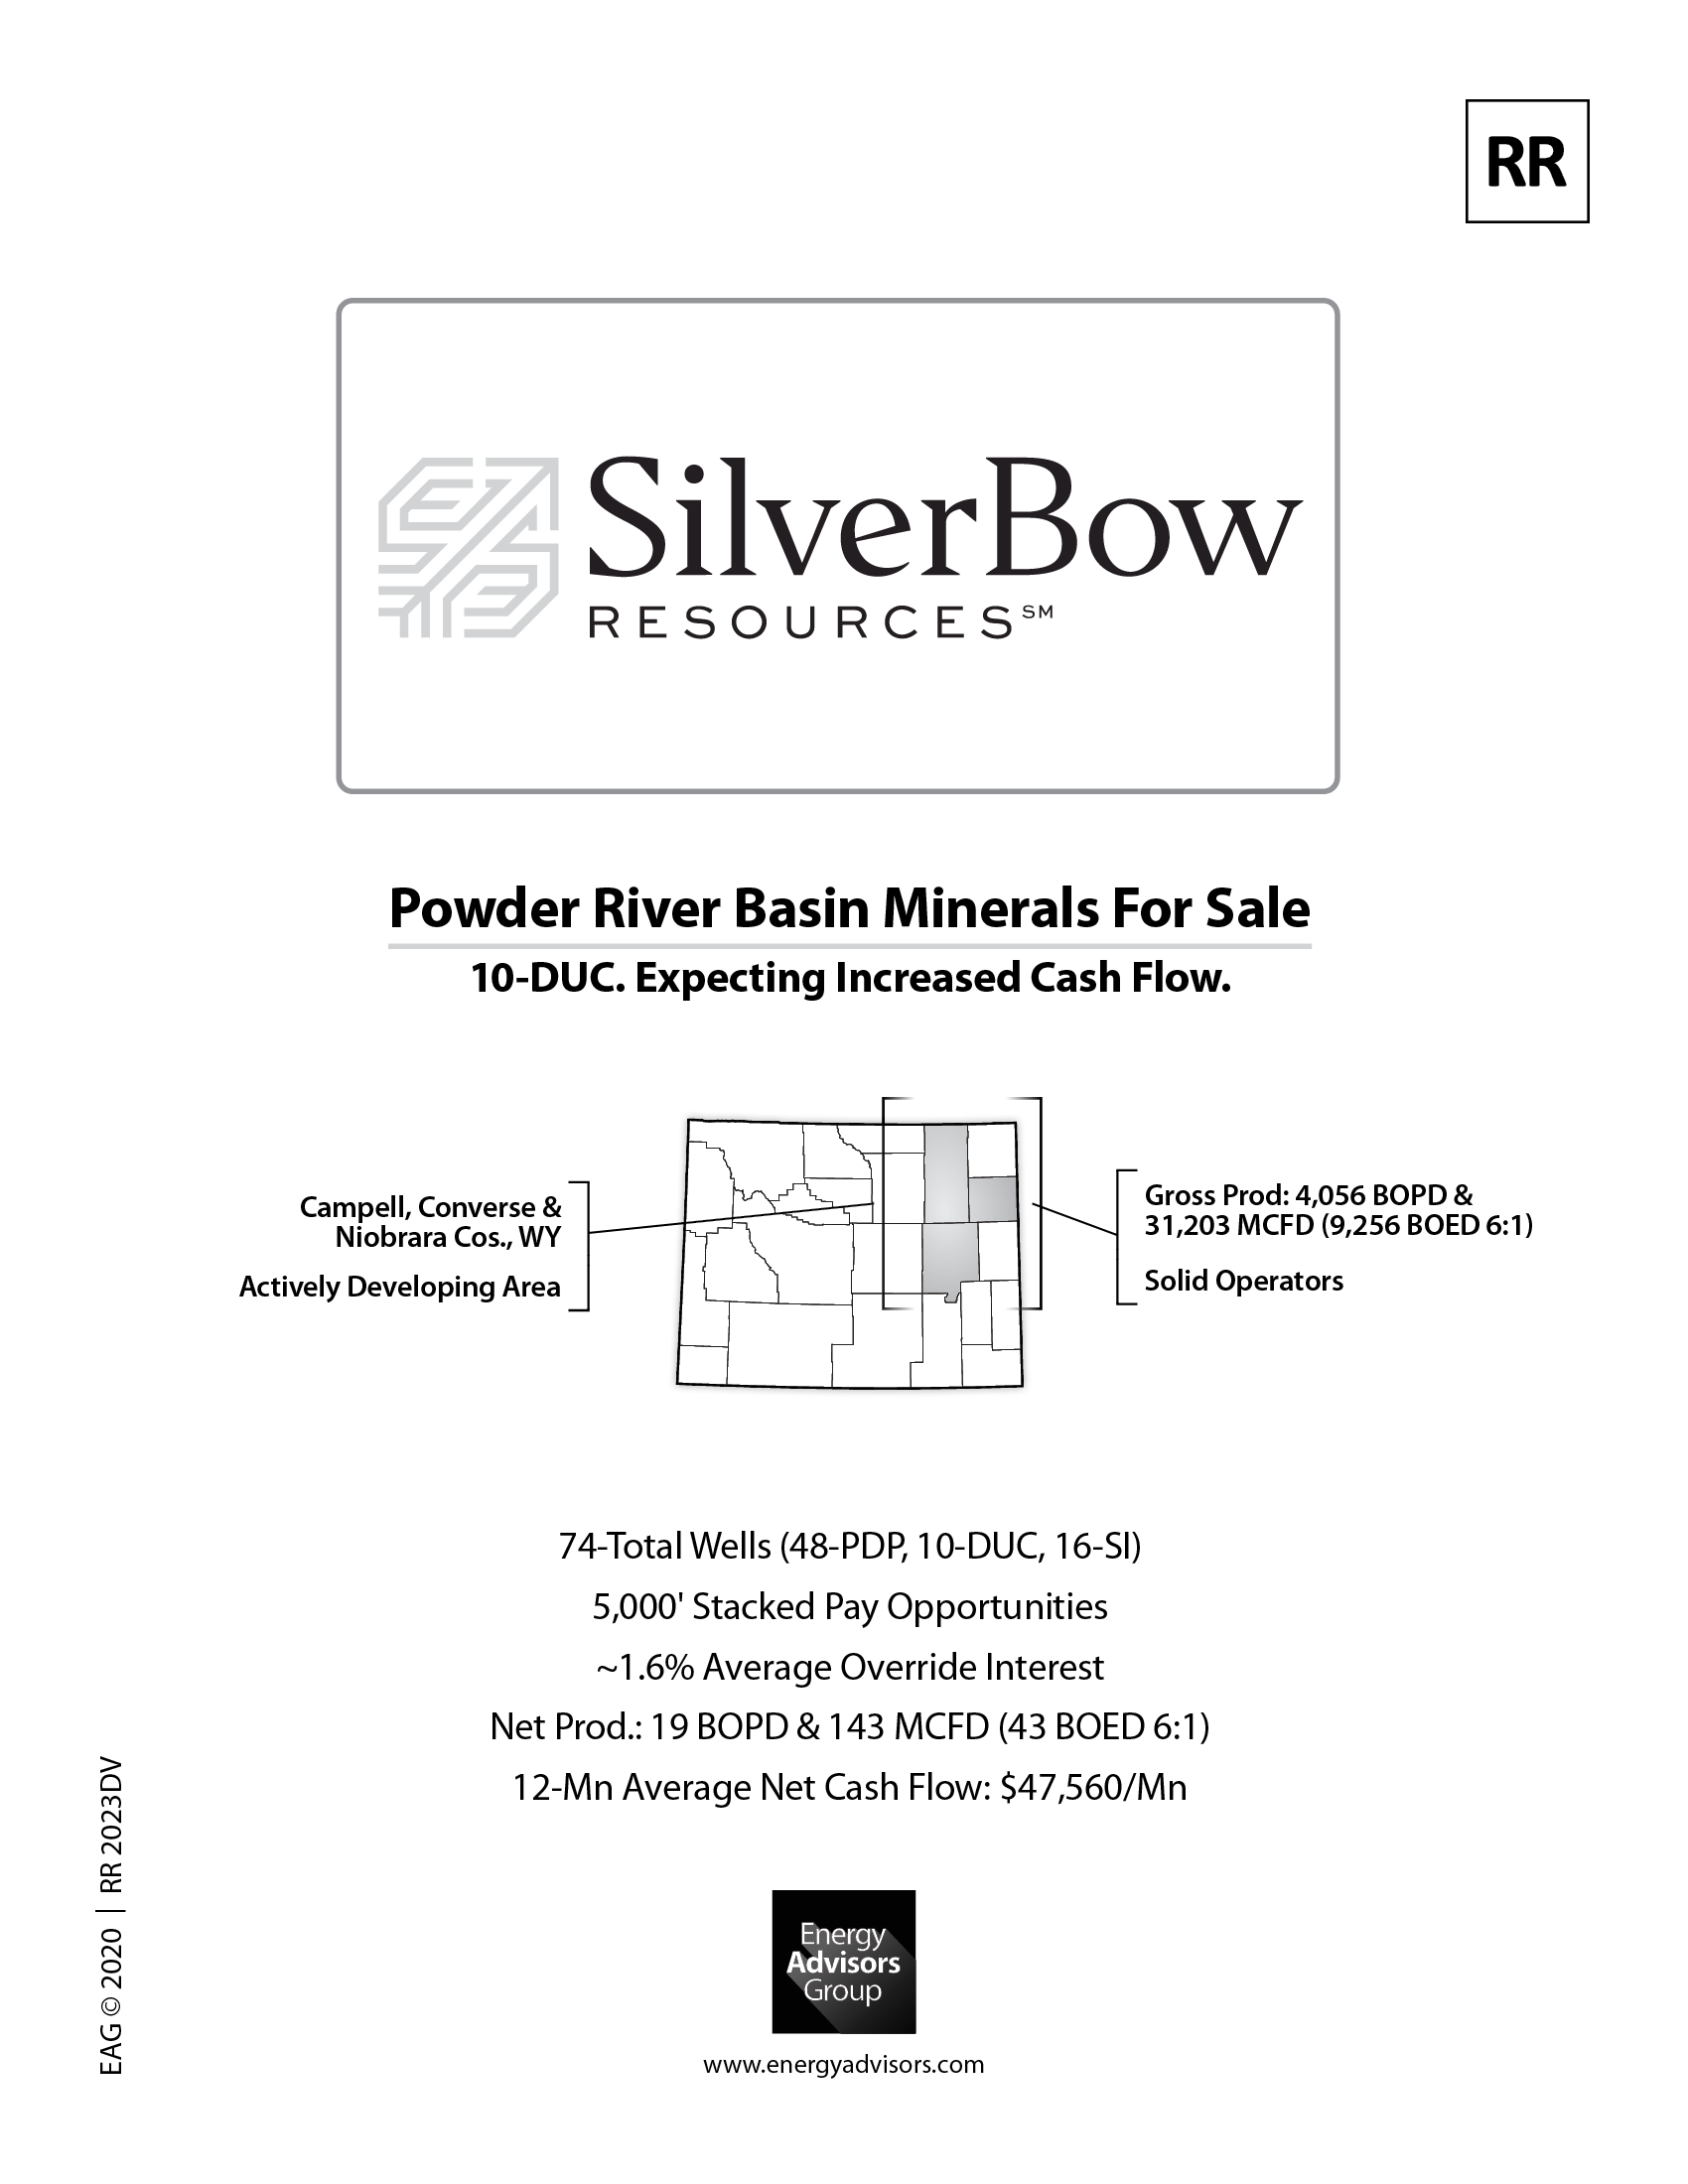 Marketed: SilverBow Resources Powder River Basin Minerals